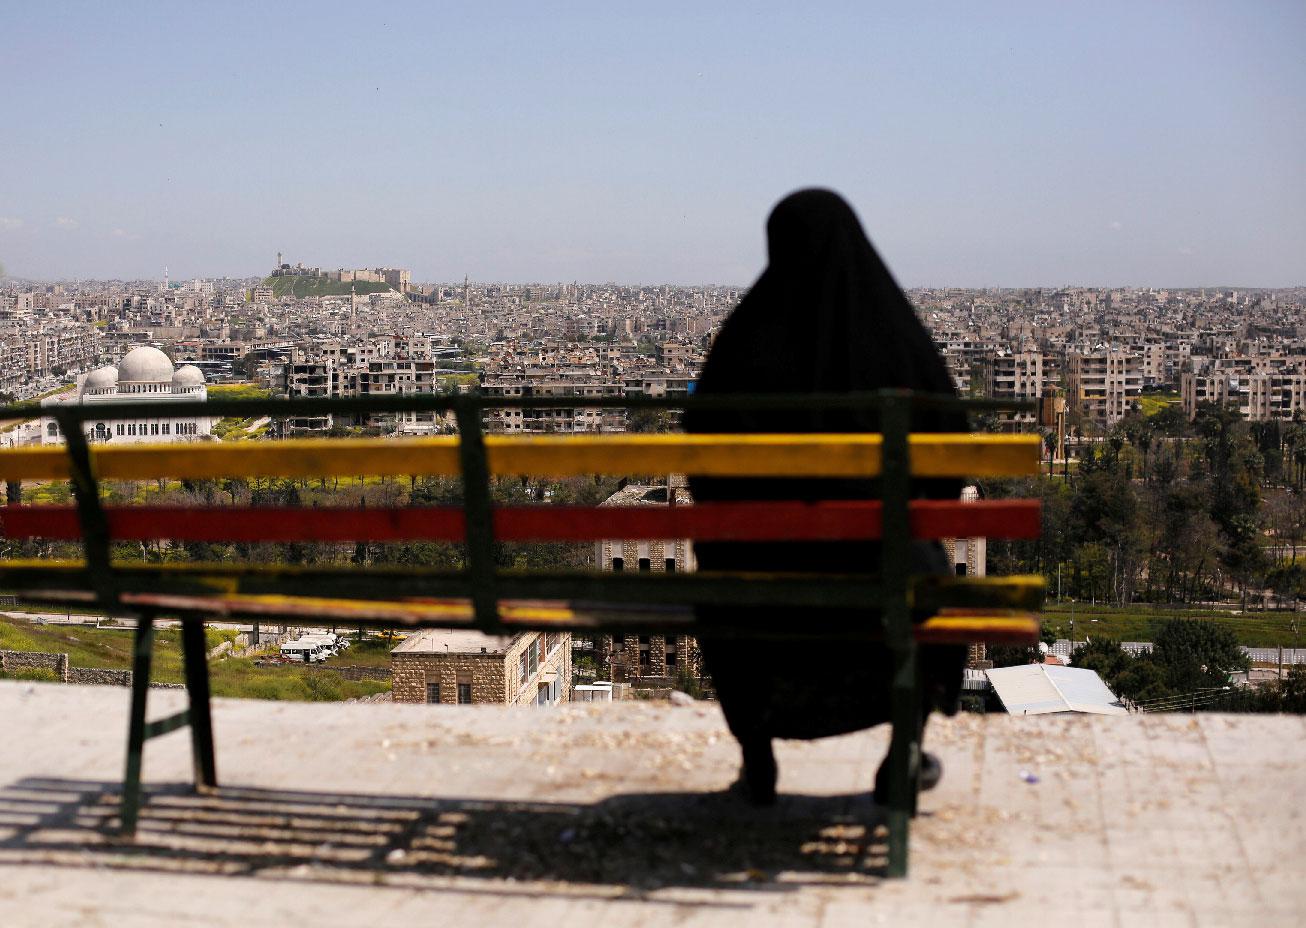 A woman sits on a bench overlooking Aleppo's ancient citadel and the old city